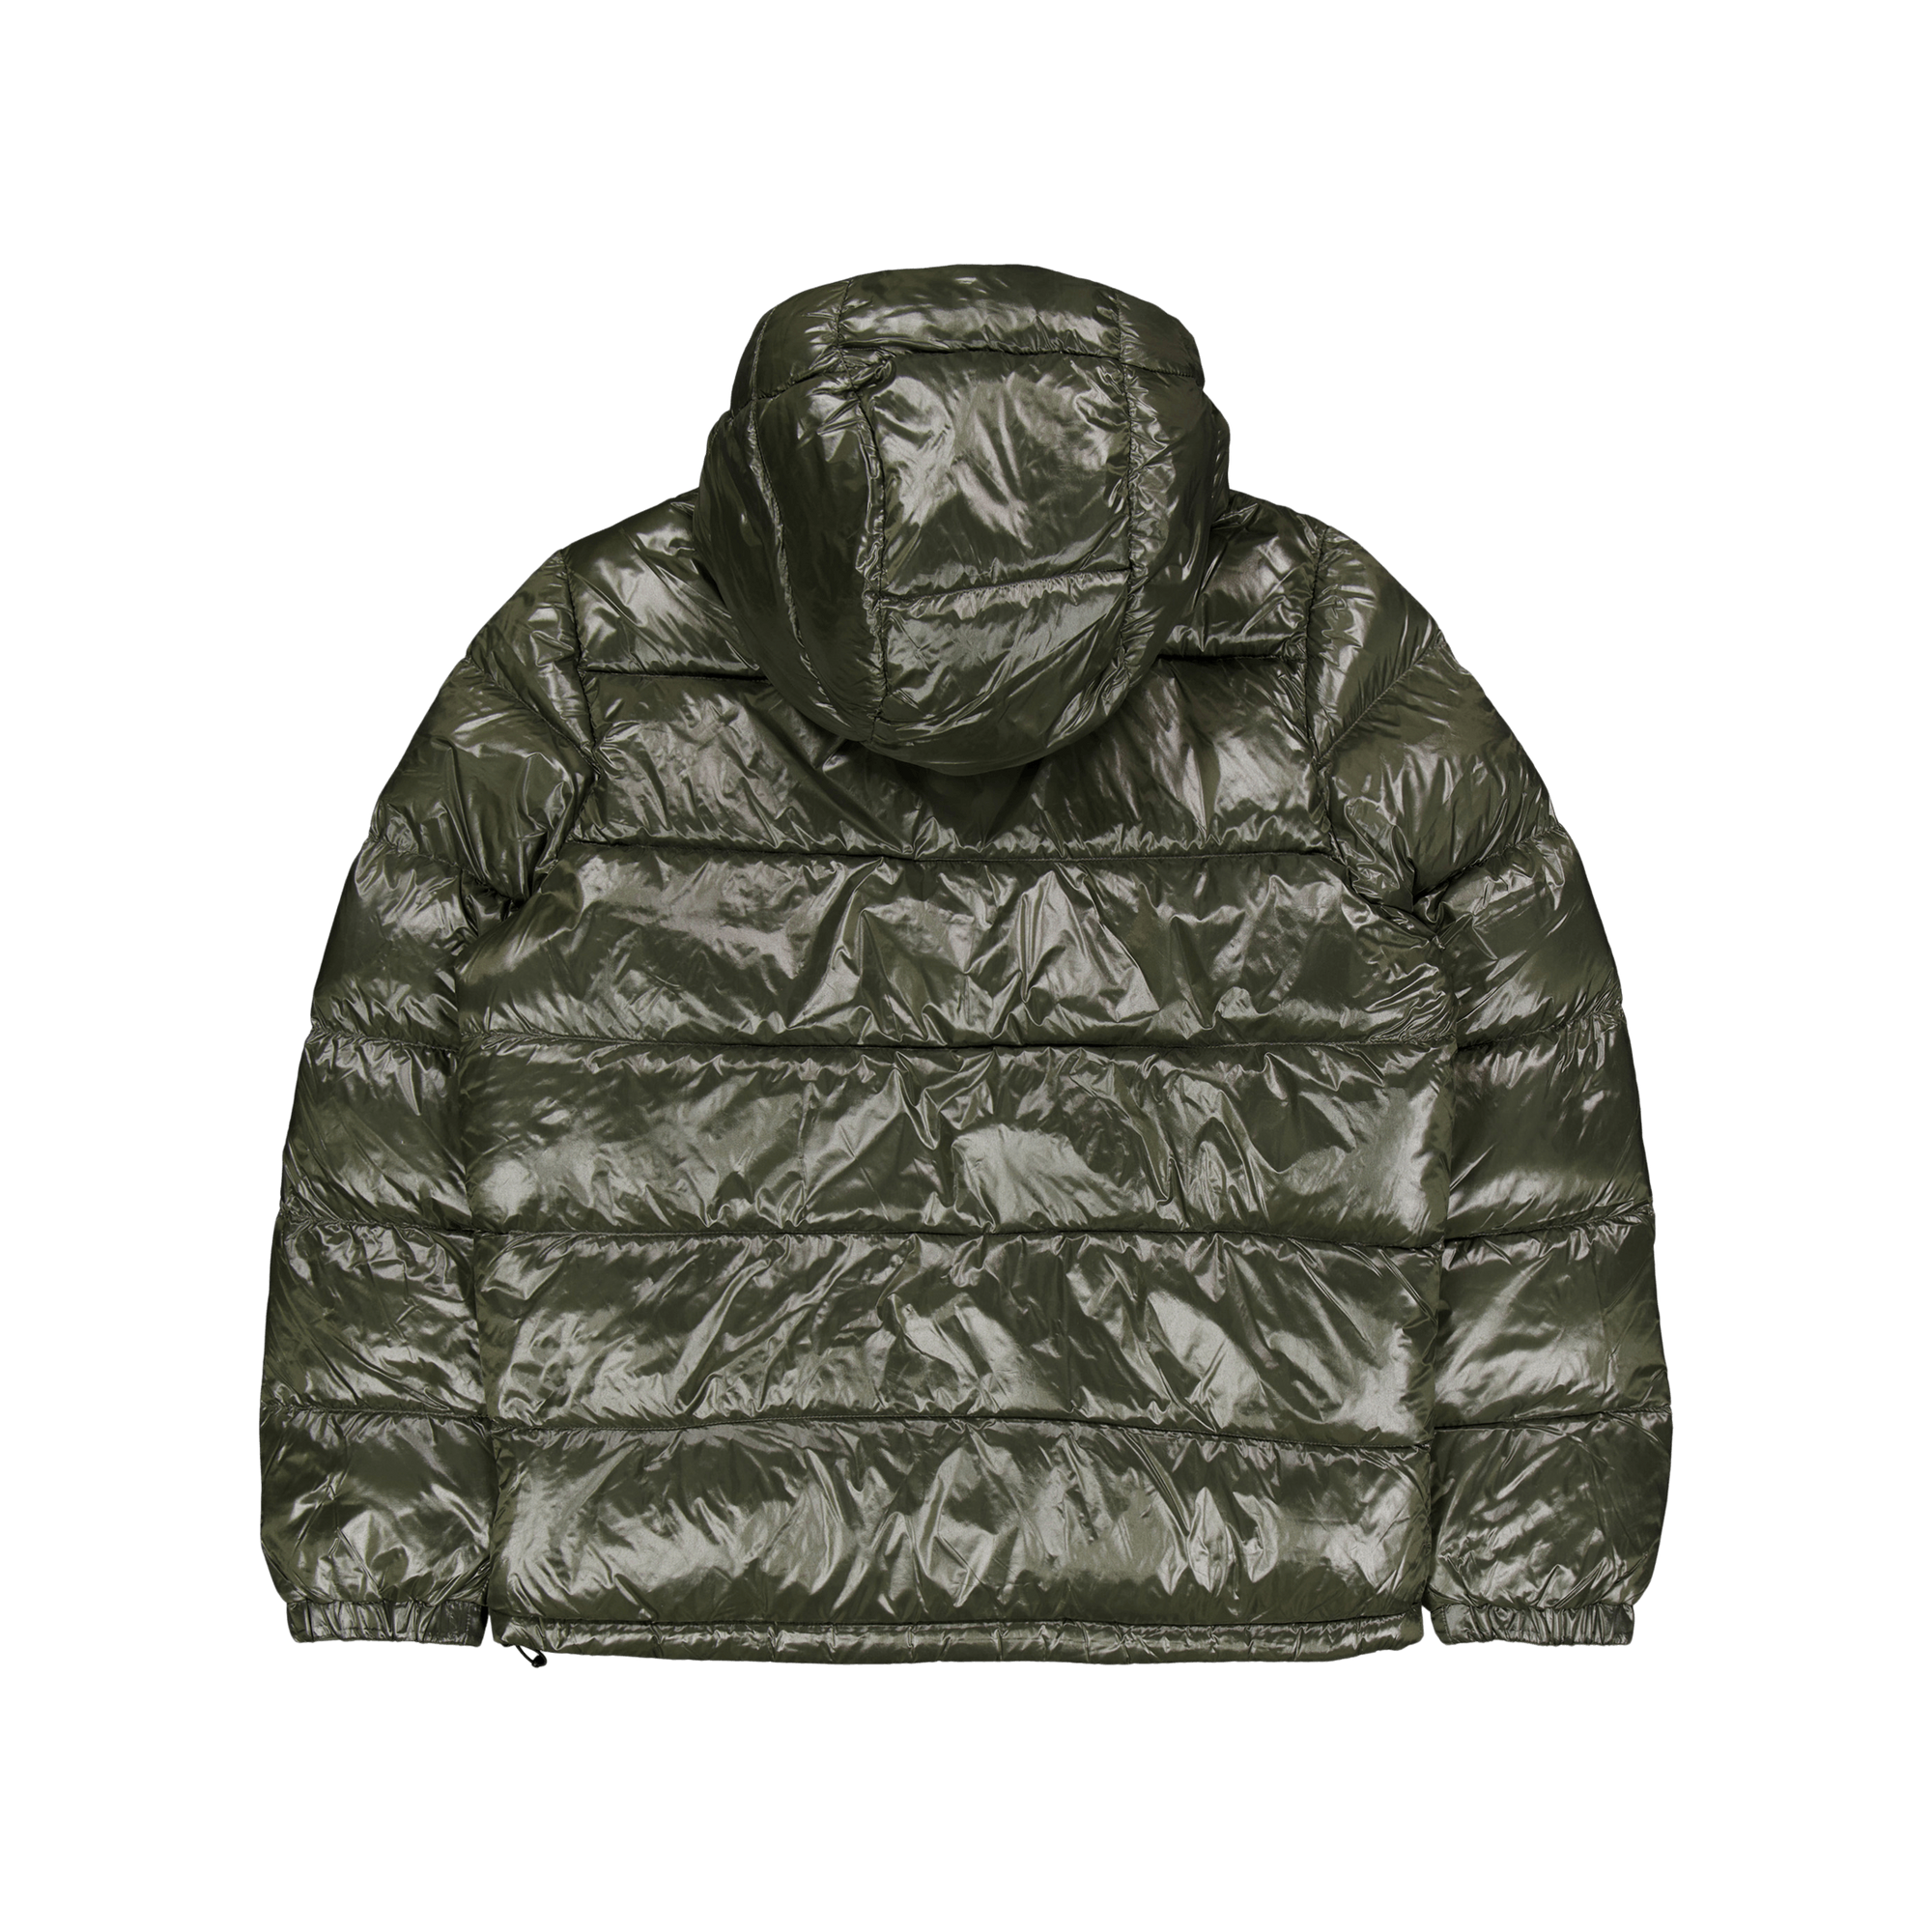 Water-Repellent Down Jacket Fossil Green/Rl 2000 Red